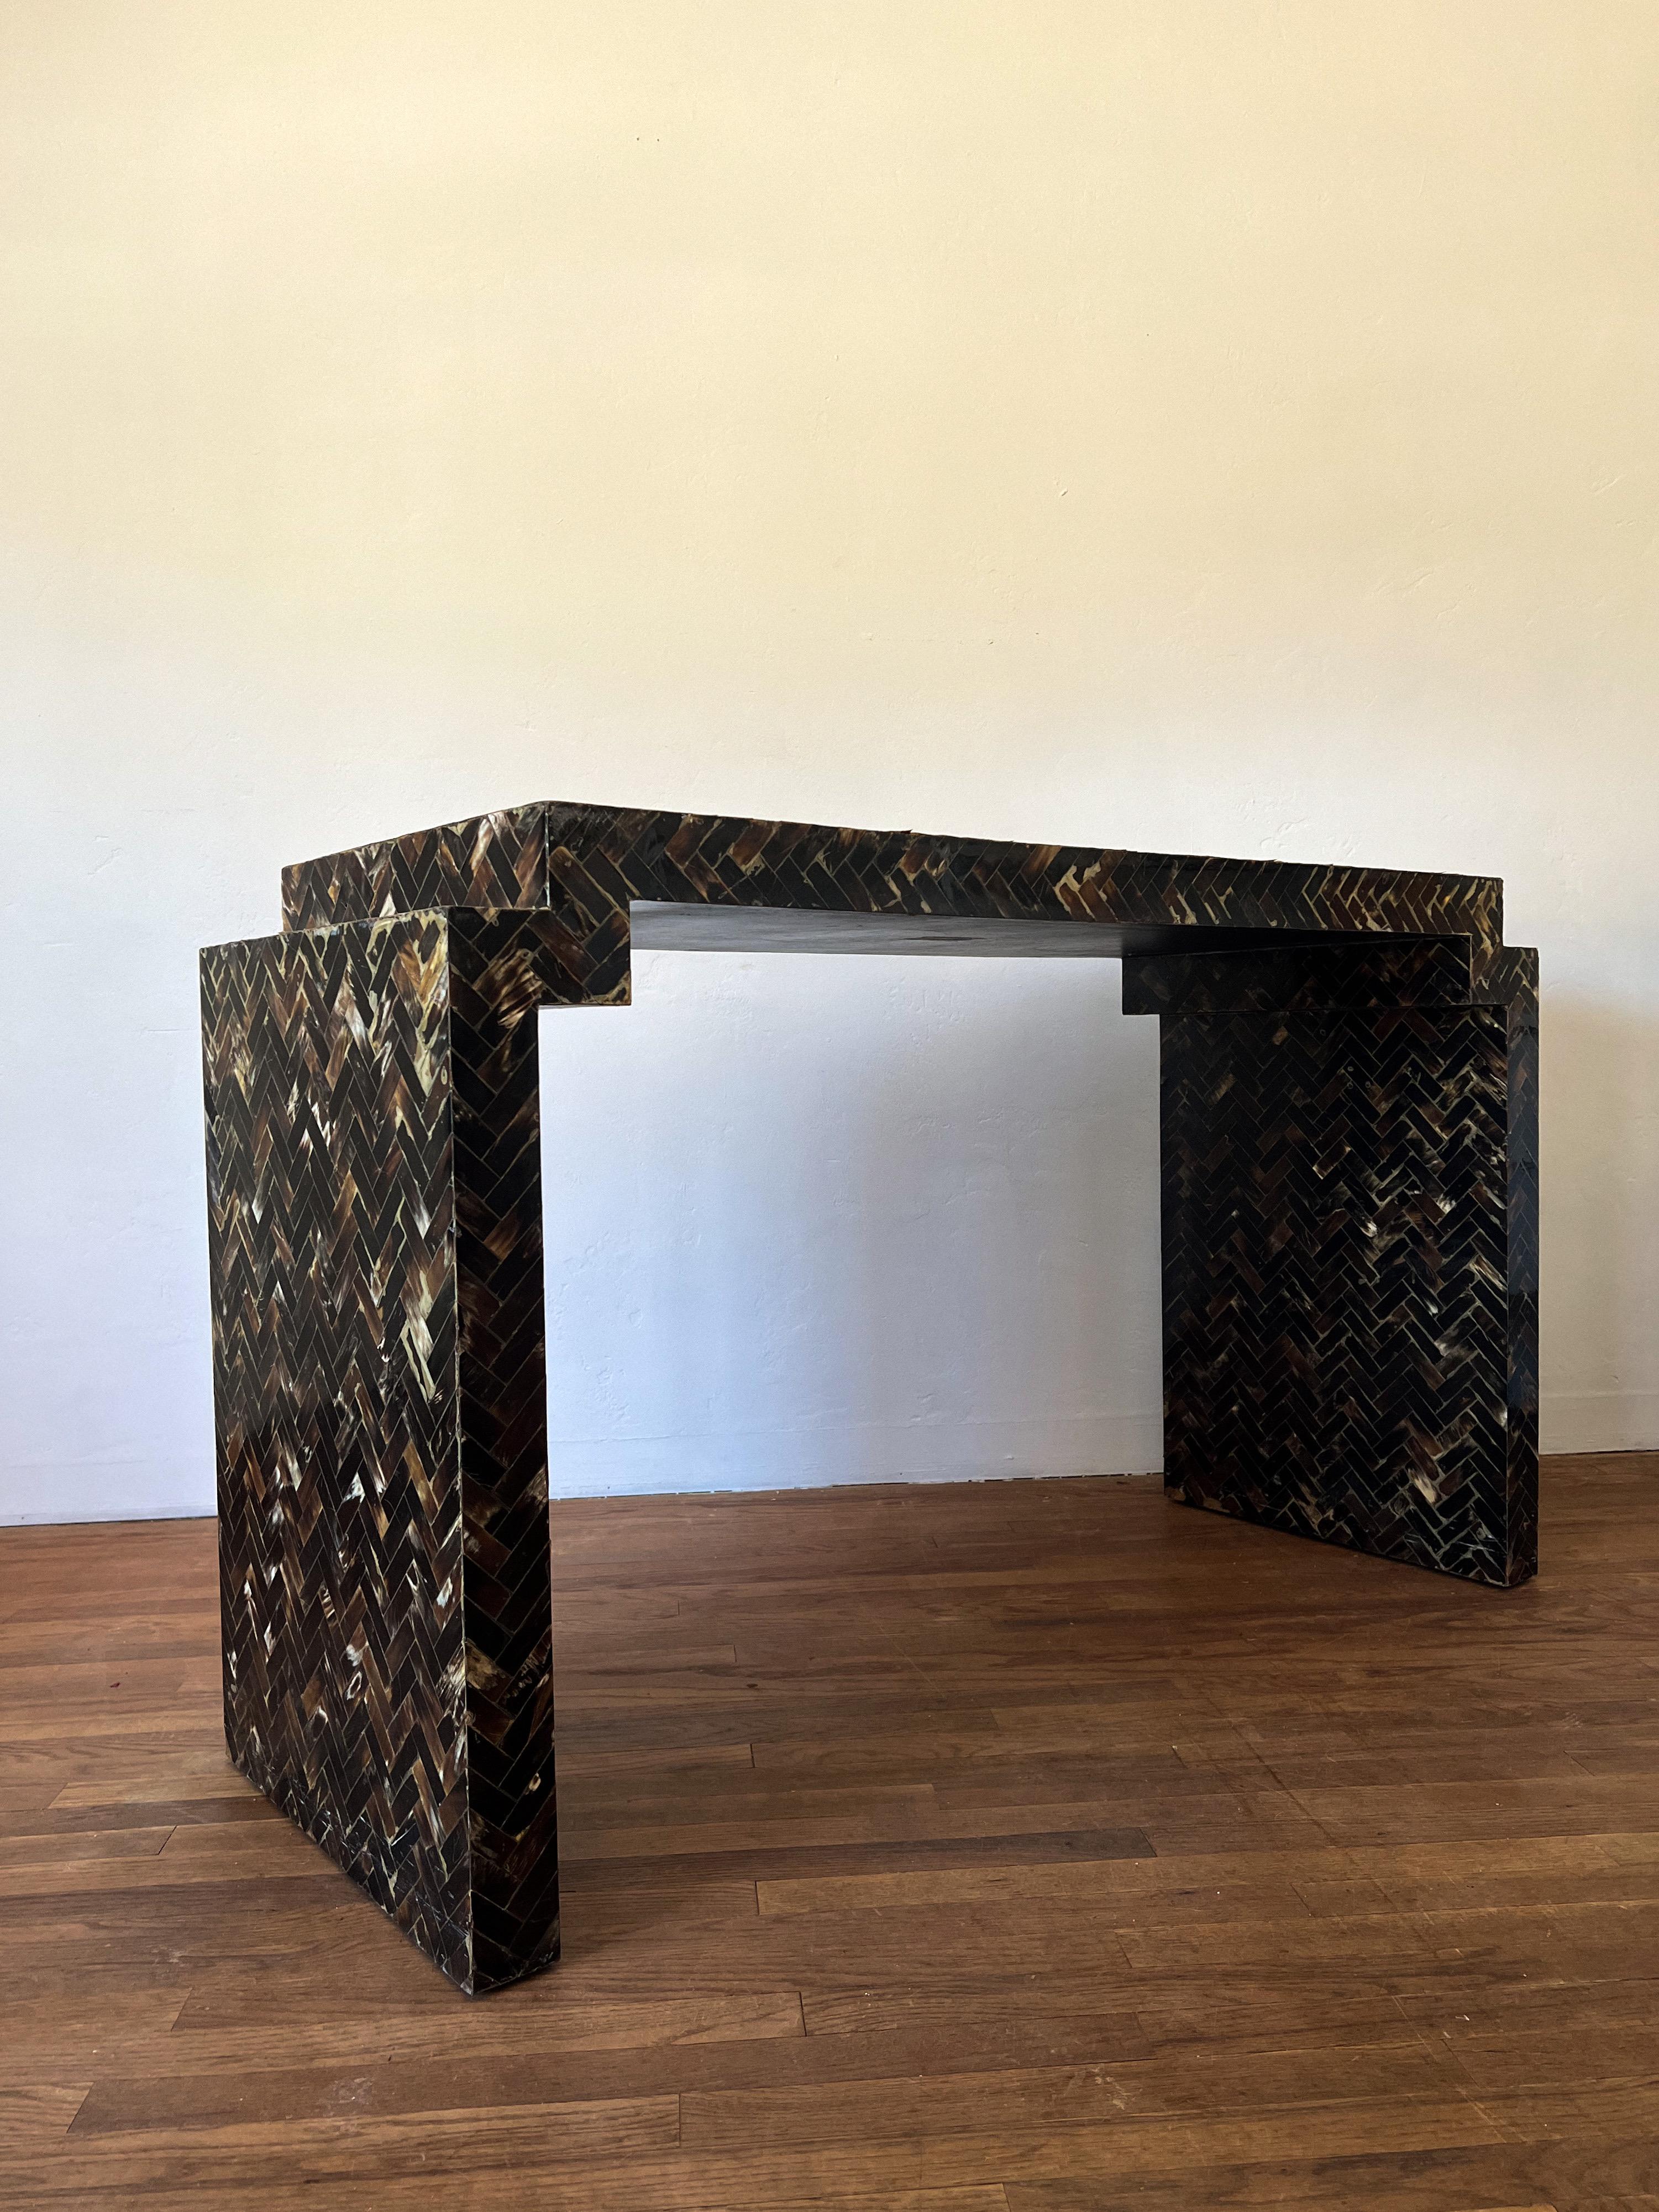 Mid-Century Modern console table with geometric step edges covered in tessellated horn and attributed to Enrique Garcel. Marked “Made in Colombia”.